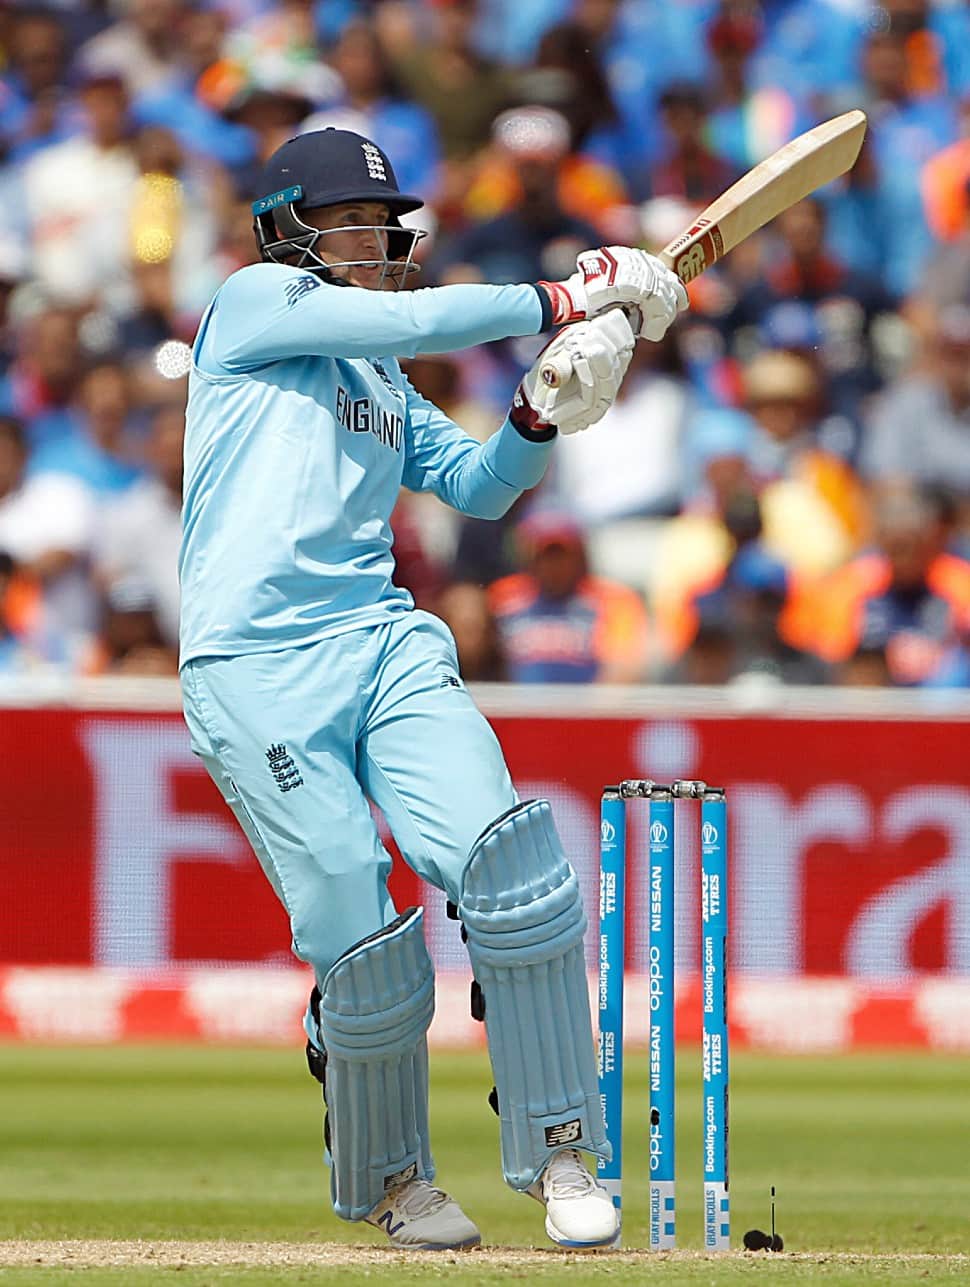 Former England captain Joe Root is in 5th spot with 4,428 runs at an average of 50.89 with 11 hundreds. (Photo: ANI)